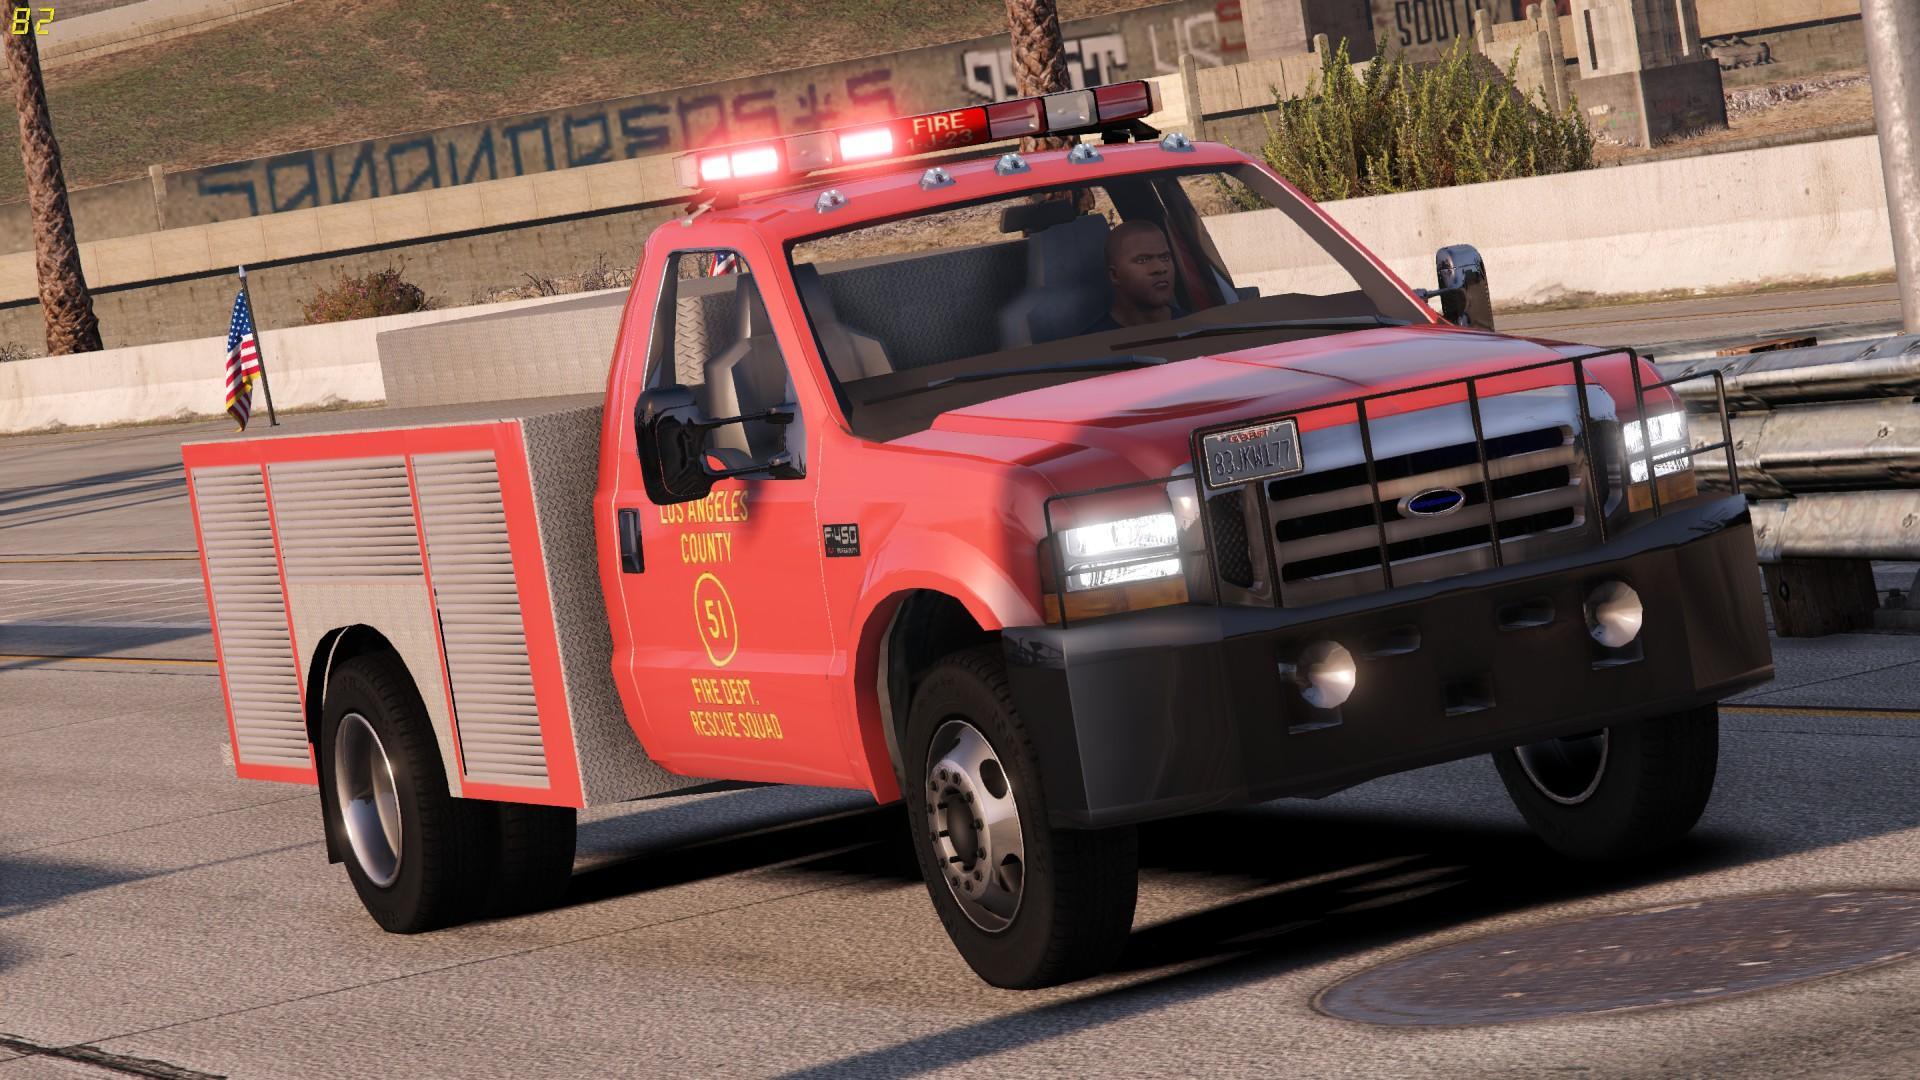 1999 Ford F450 - Squad 51 Inspired